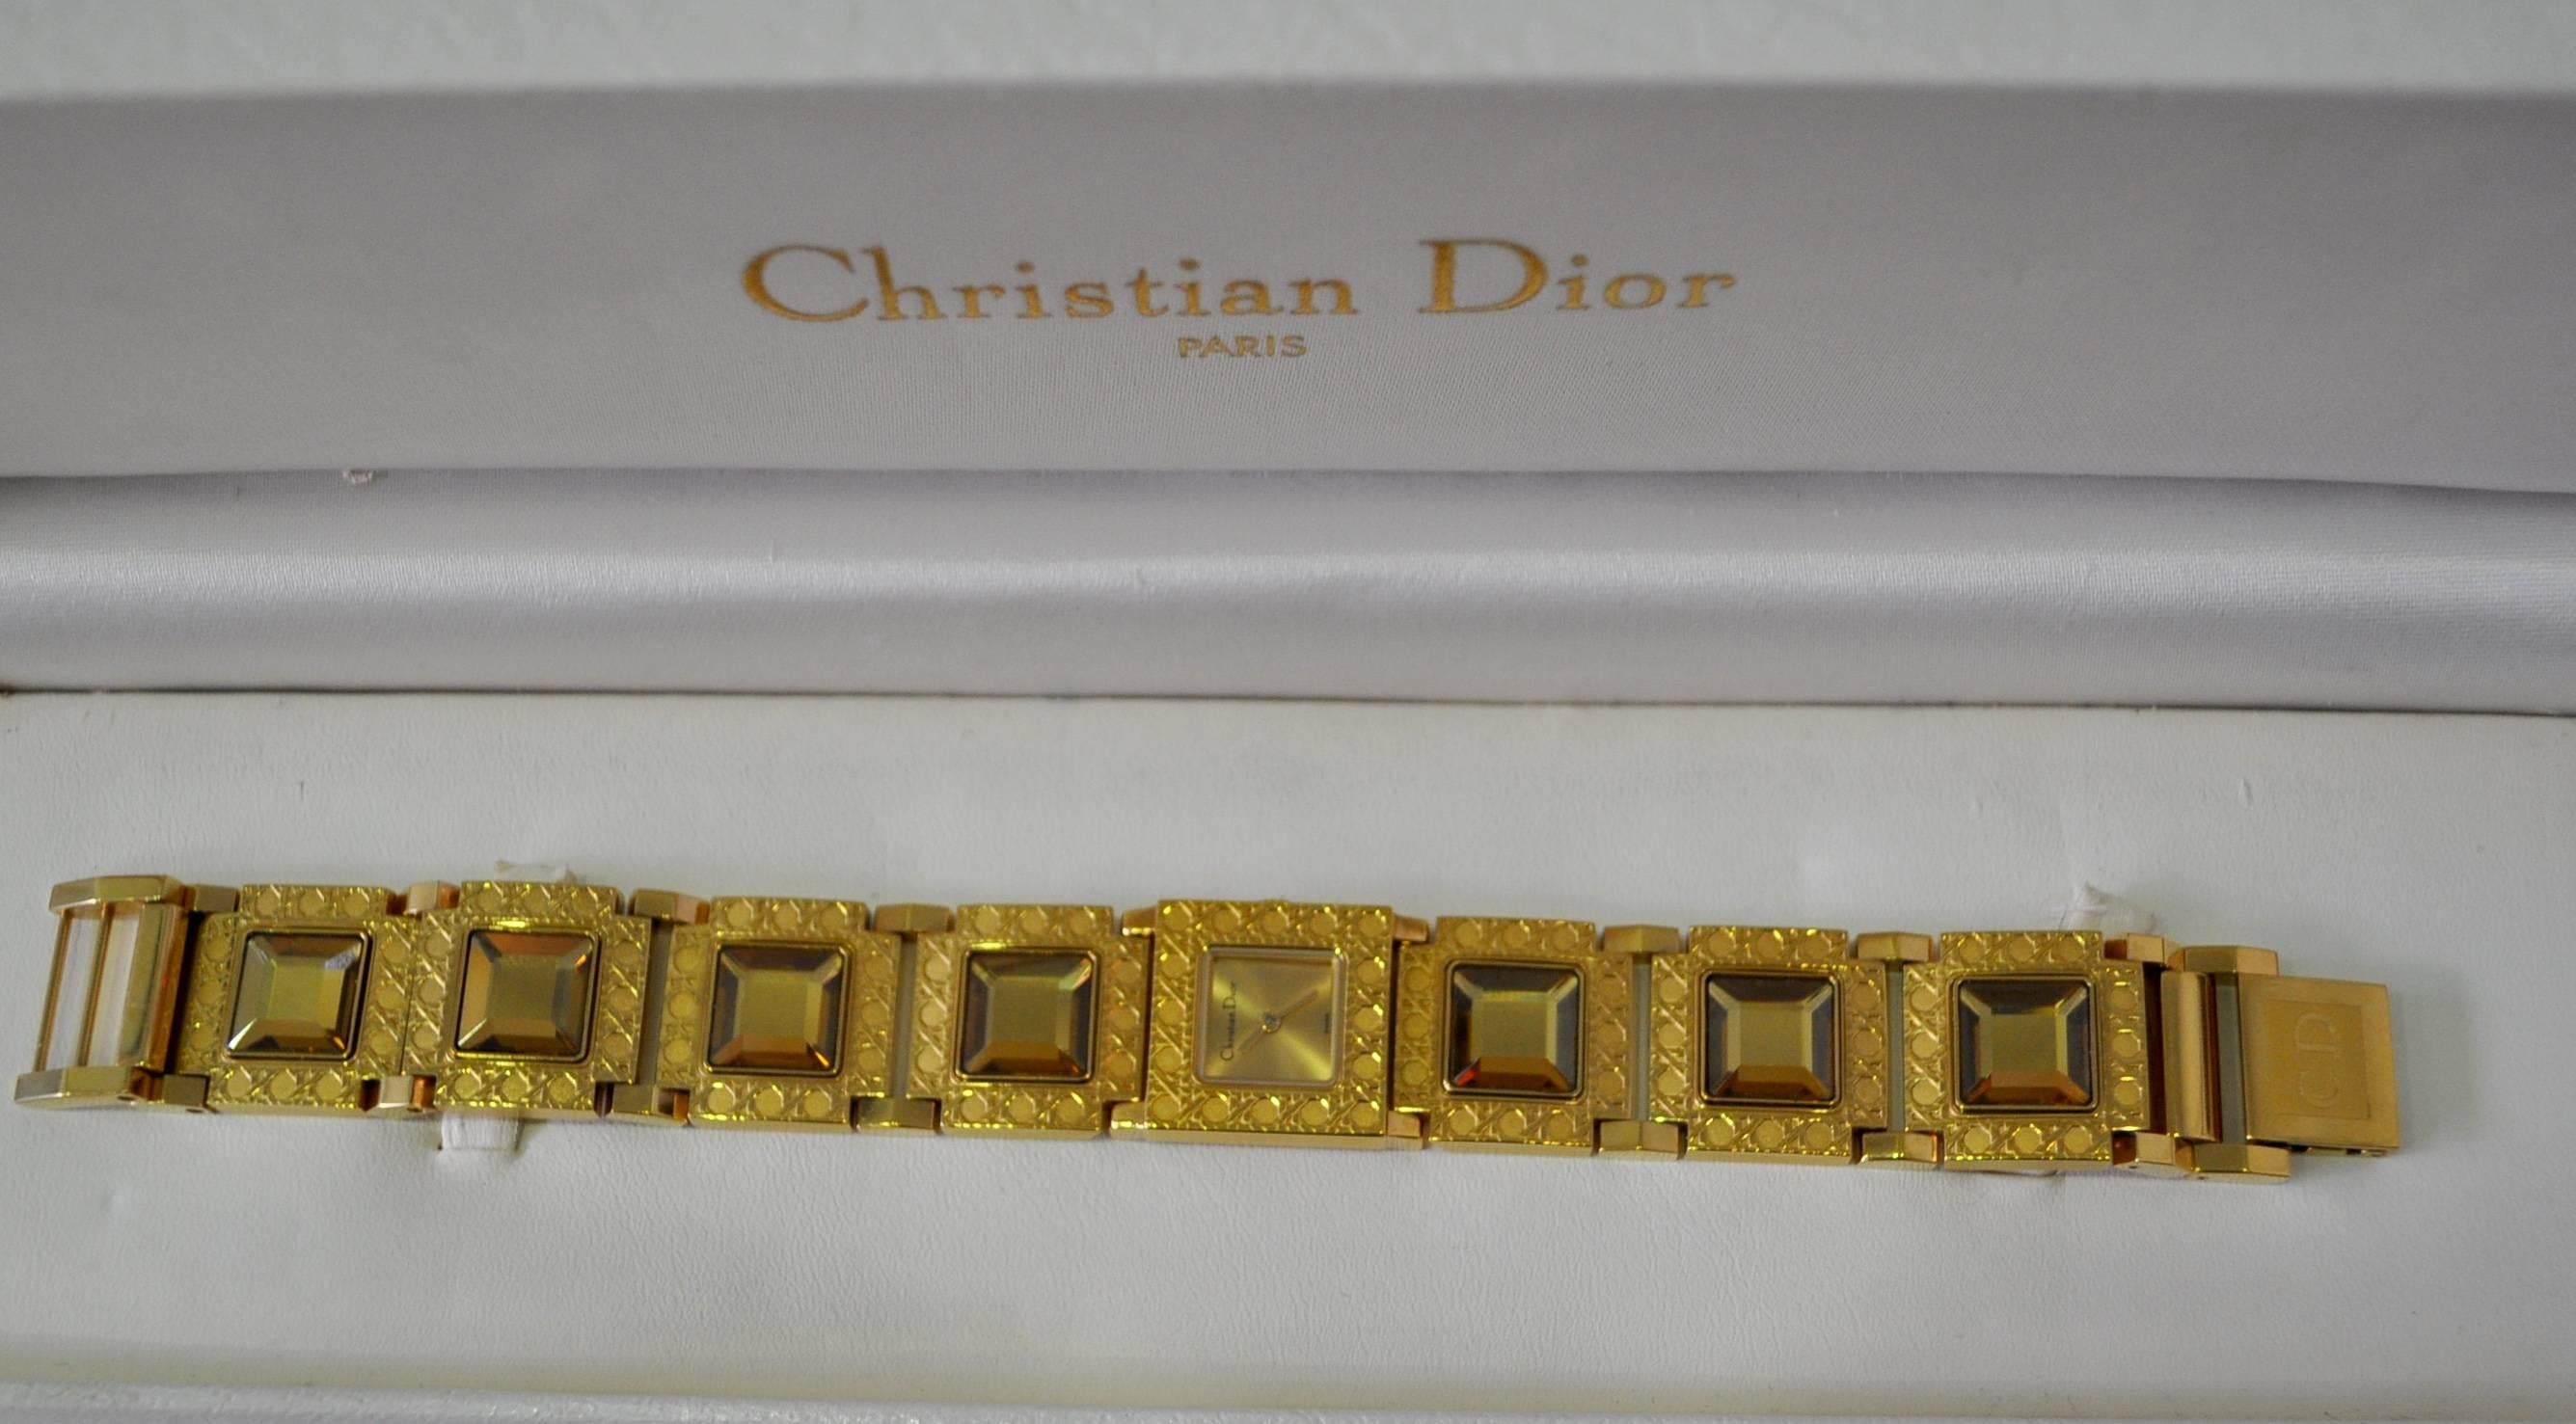 Art Deco Authentic Christian Dior Jewel Encrusted Gold Tone Link Watch For Sale